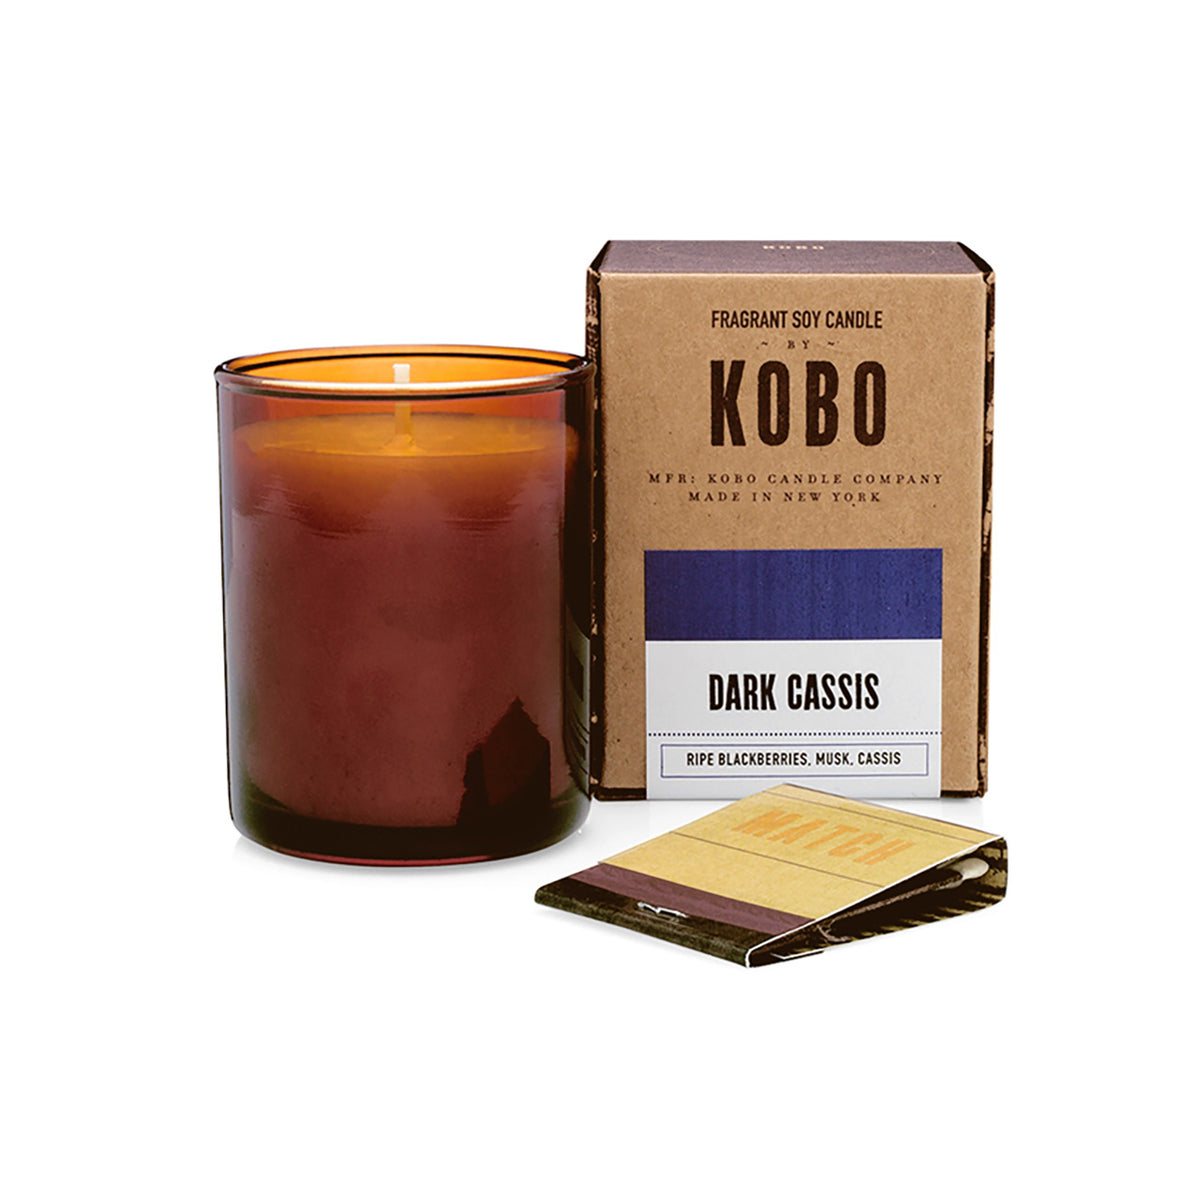 Kobo Pure Soy votive candle in an amber glass jar with ceramic matches and kraft box. Dark Cassis scent